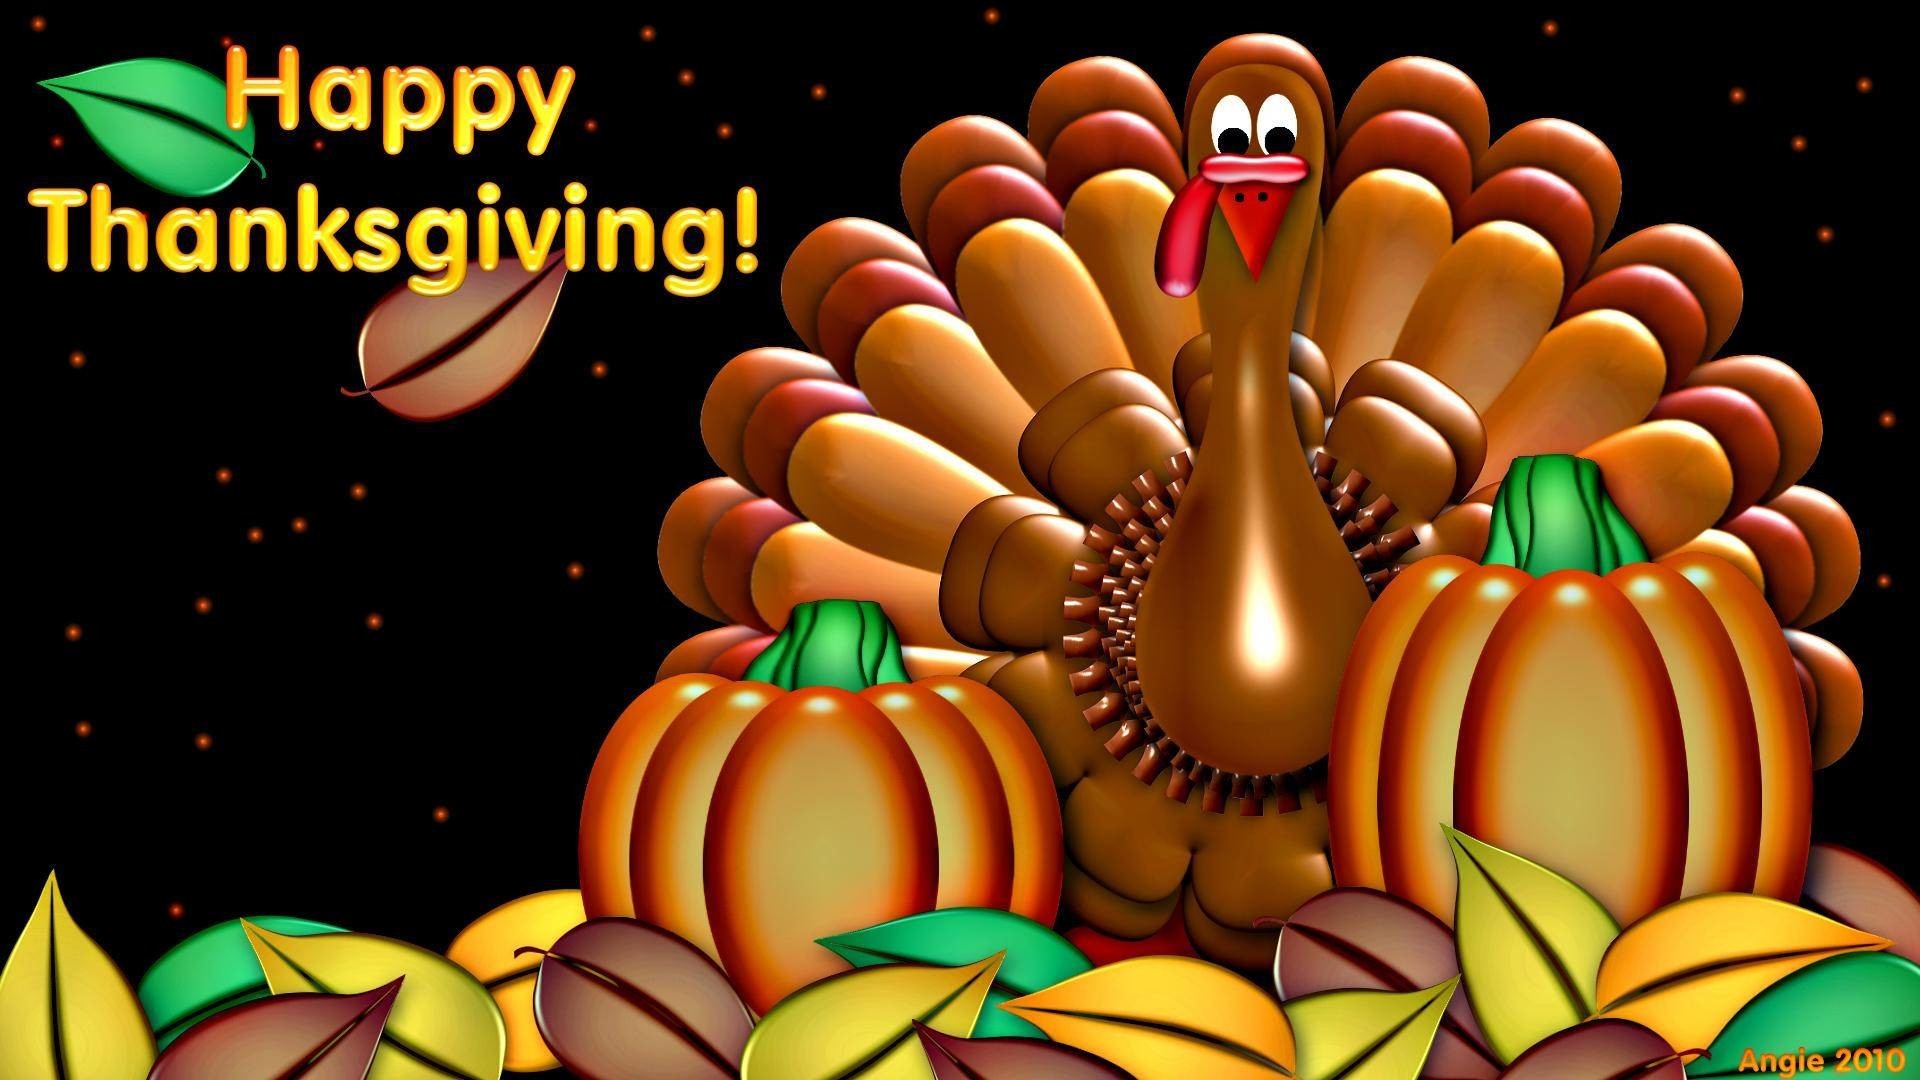 1920x1080  Funny Thanksgiving Wallpaper Backgrounds #8779645